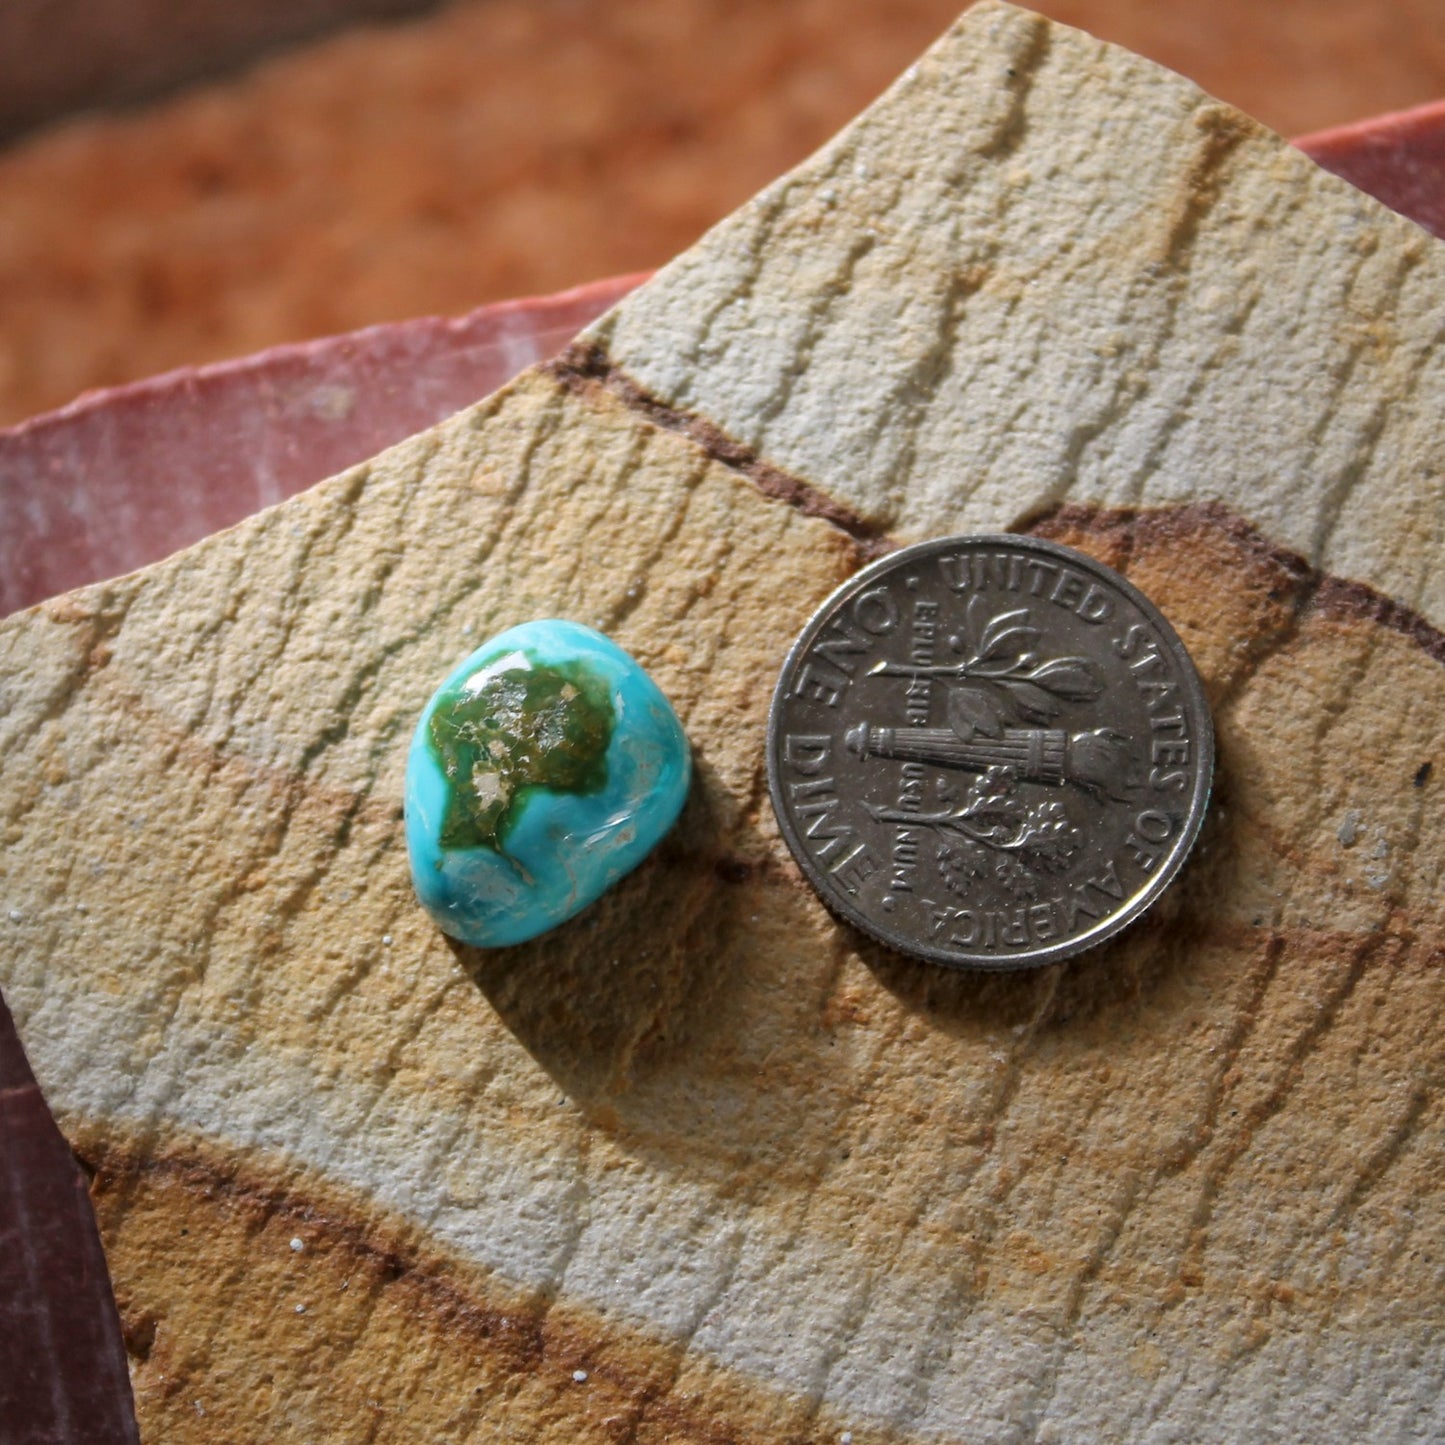 5.7 carat color change Stone Mountain Turquoise cabochon with a high dome